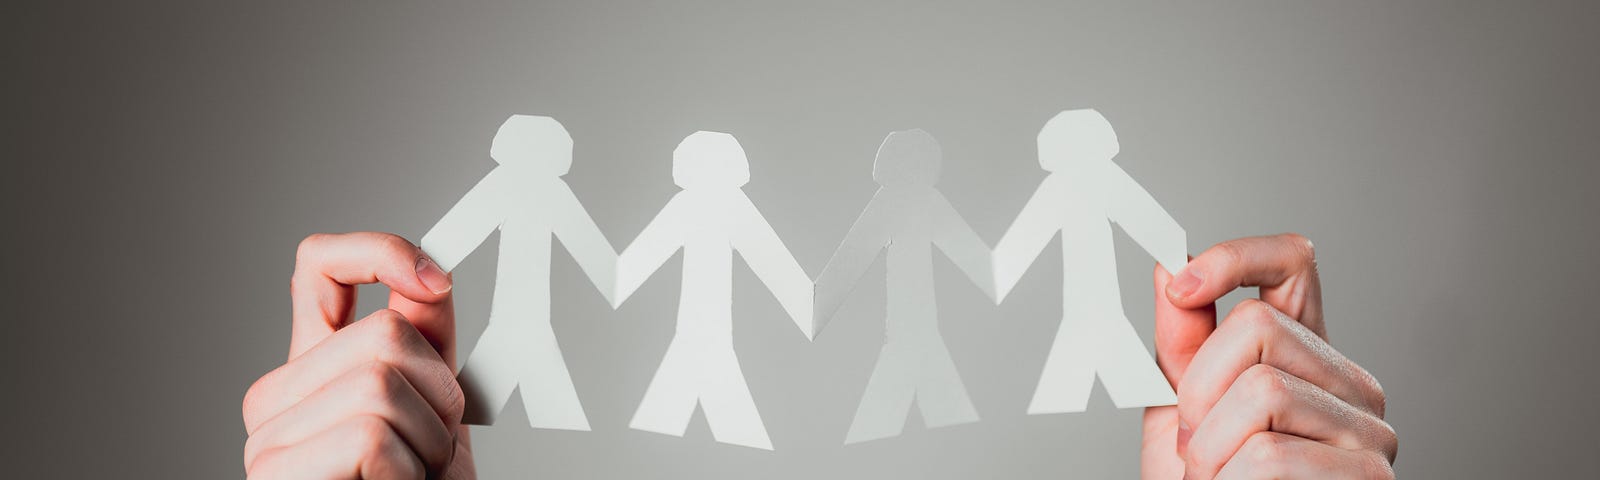 Two hands hold cut out paper figures (humans holding hands).